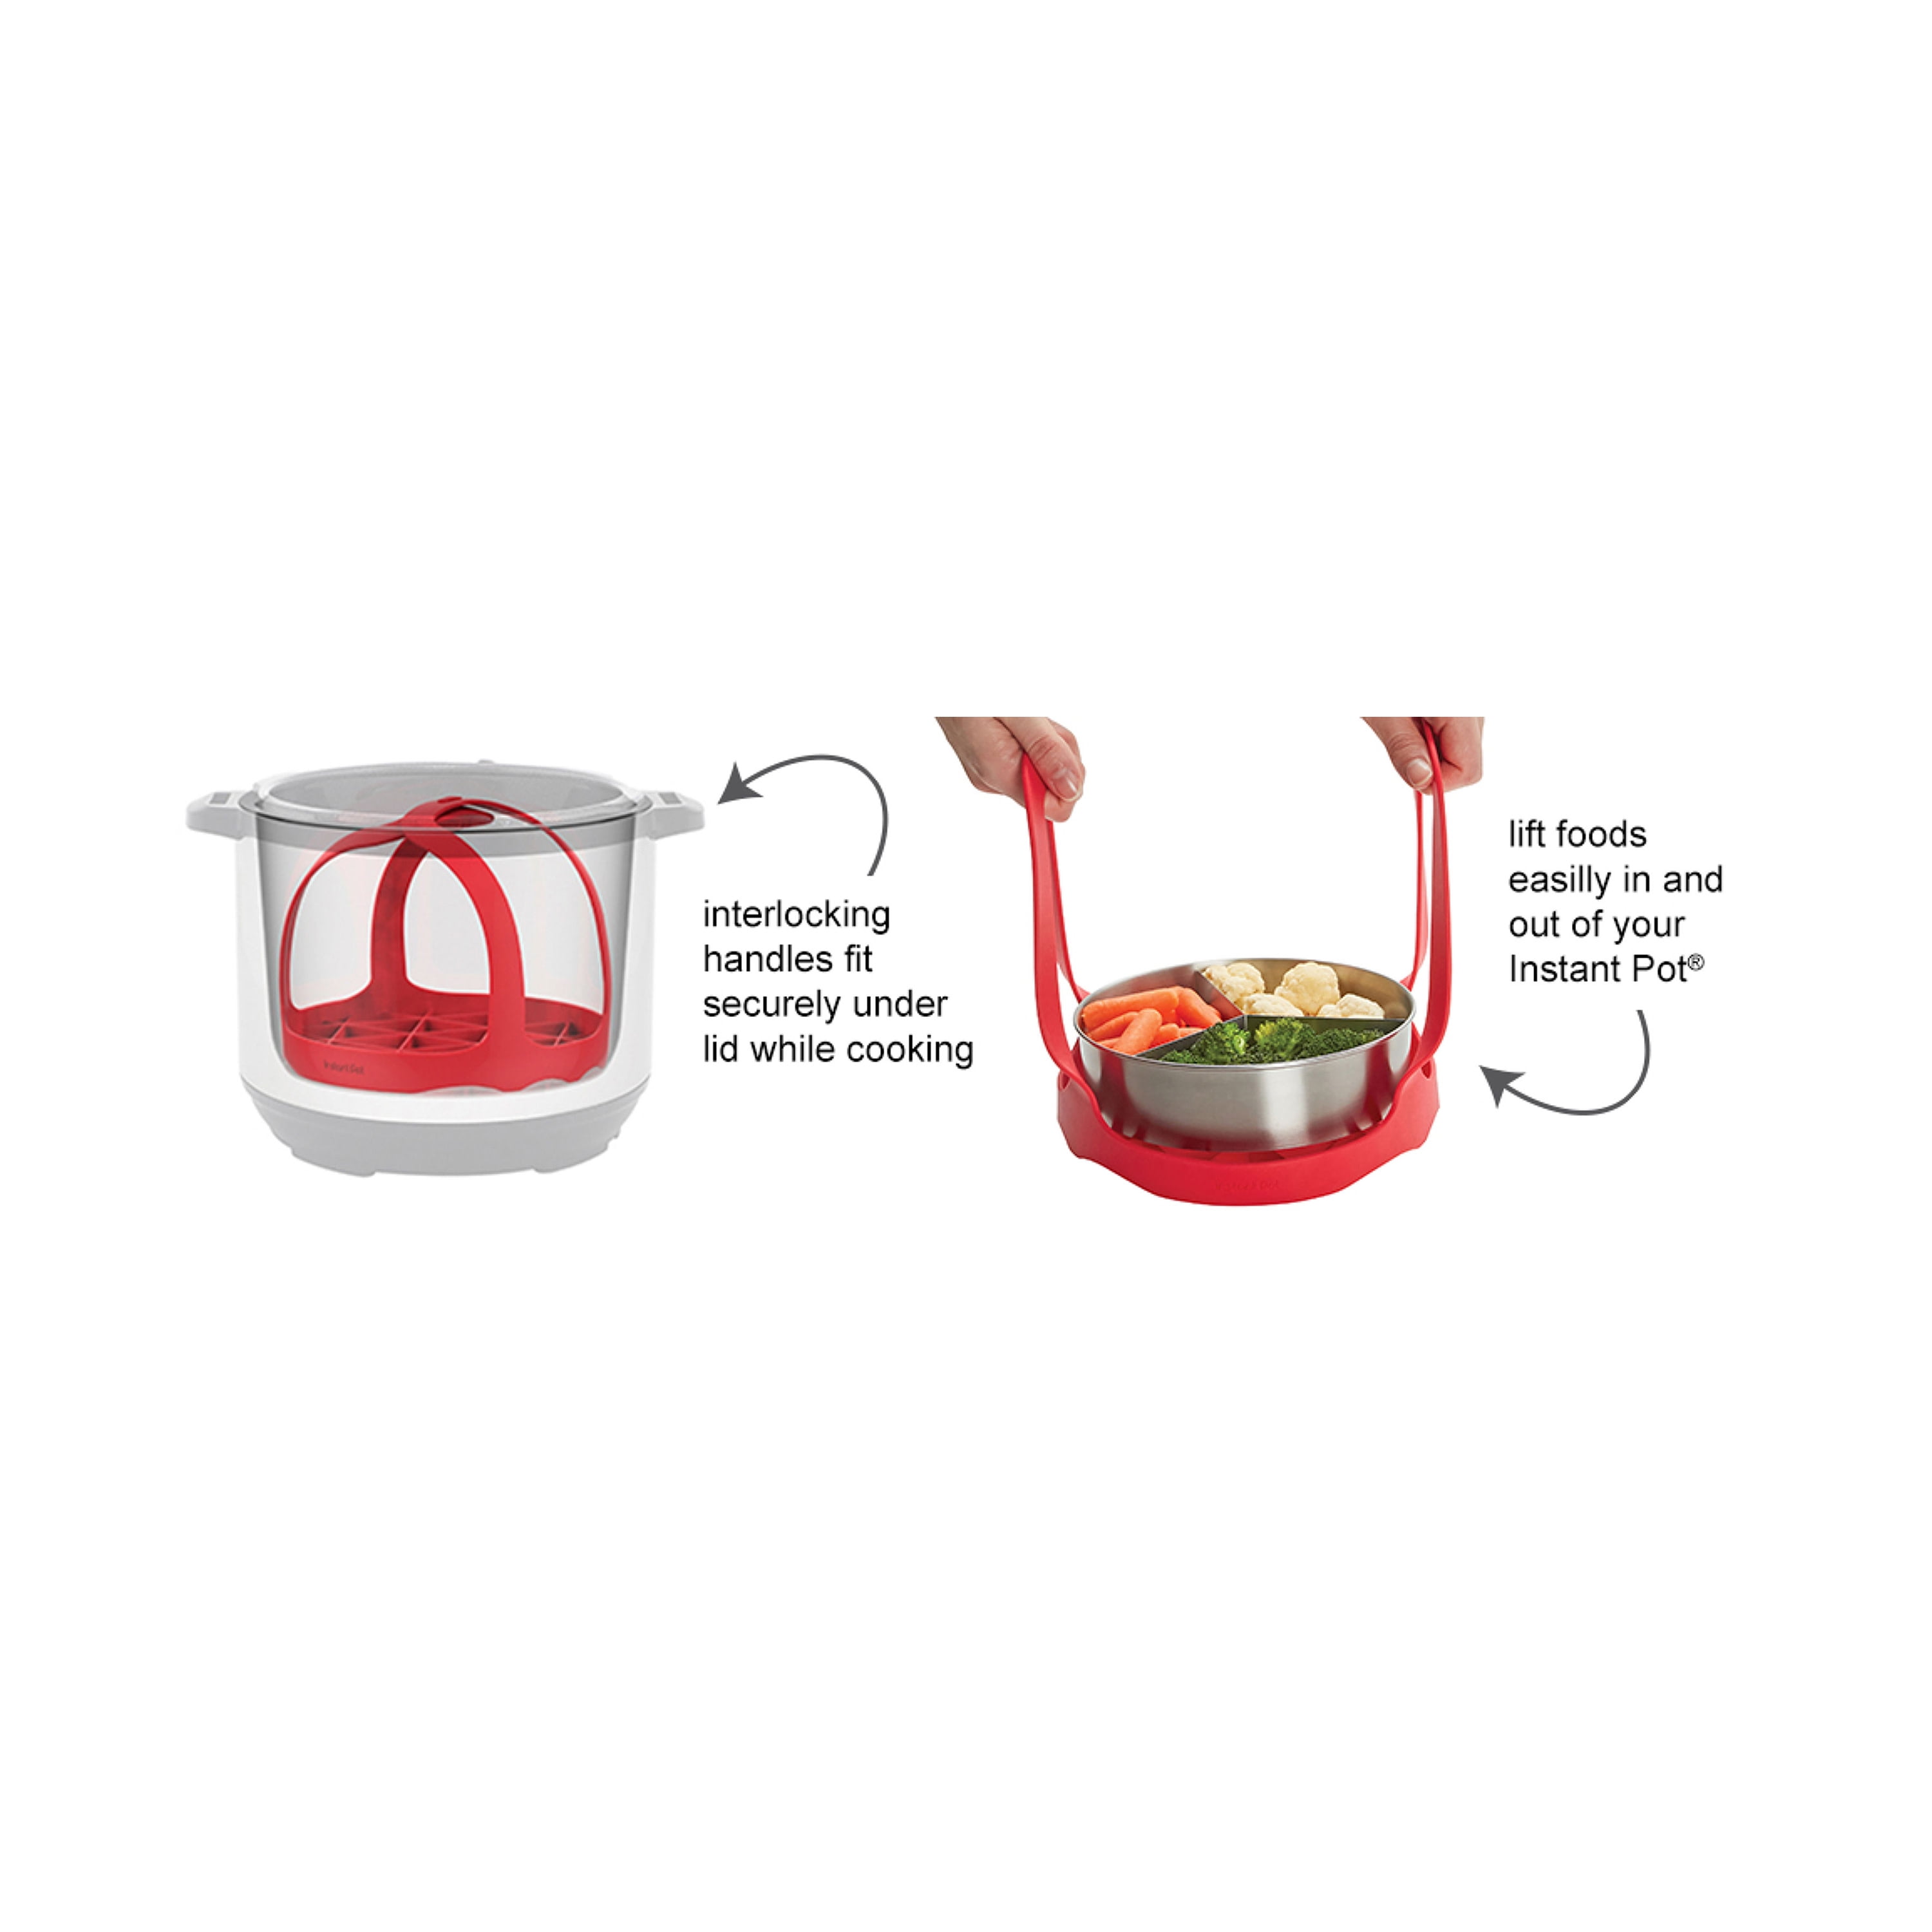 Pressure Cooker Sling, Silicone Bakeware Sling for 6 Qt/8 qt Instant Pot, Ninja Foodi and Multi-function Cooker Anti-scalding Bakeware Lifter